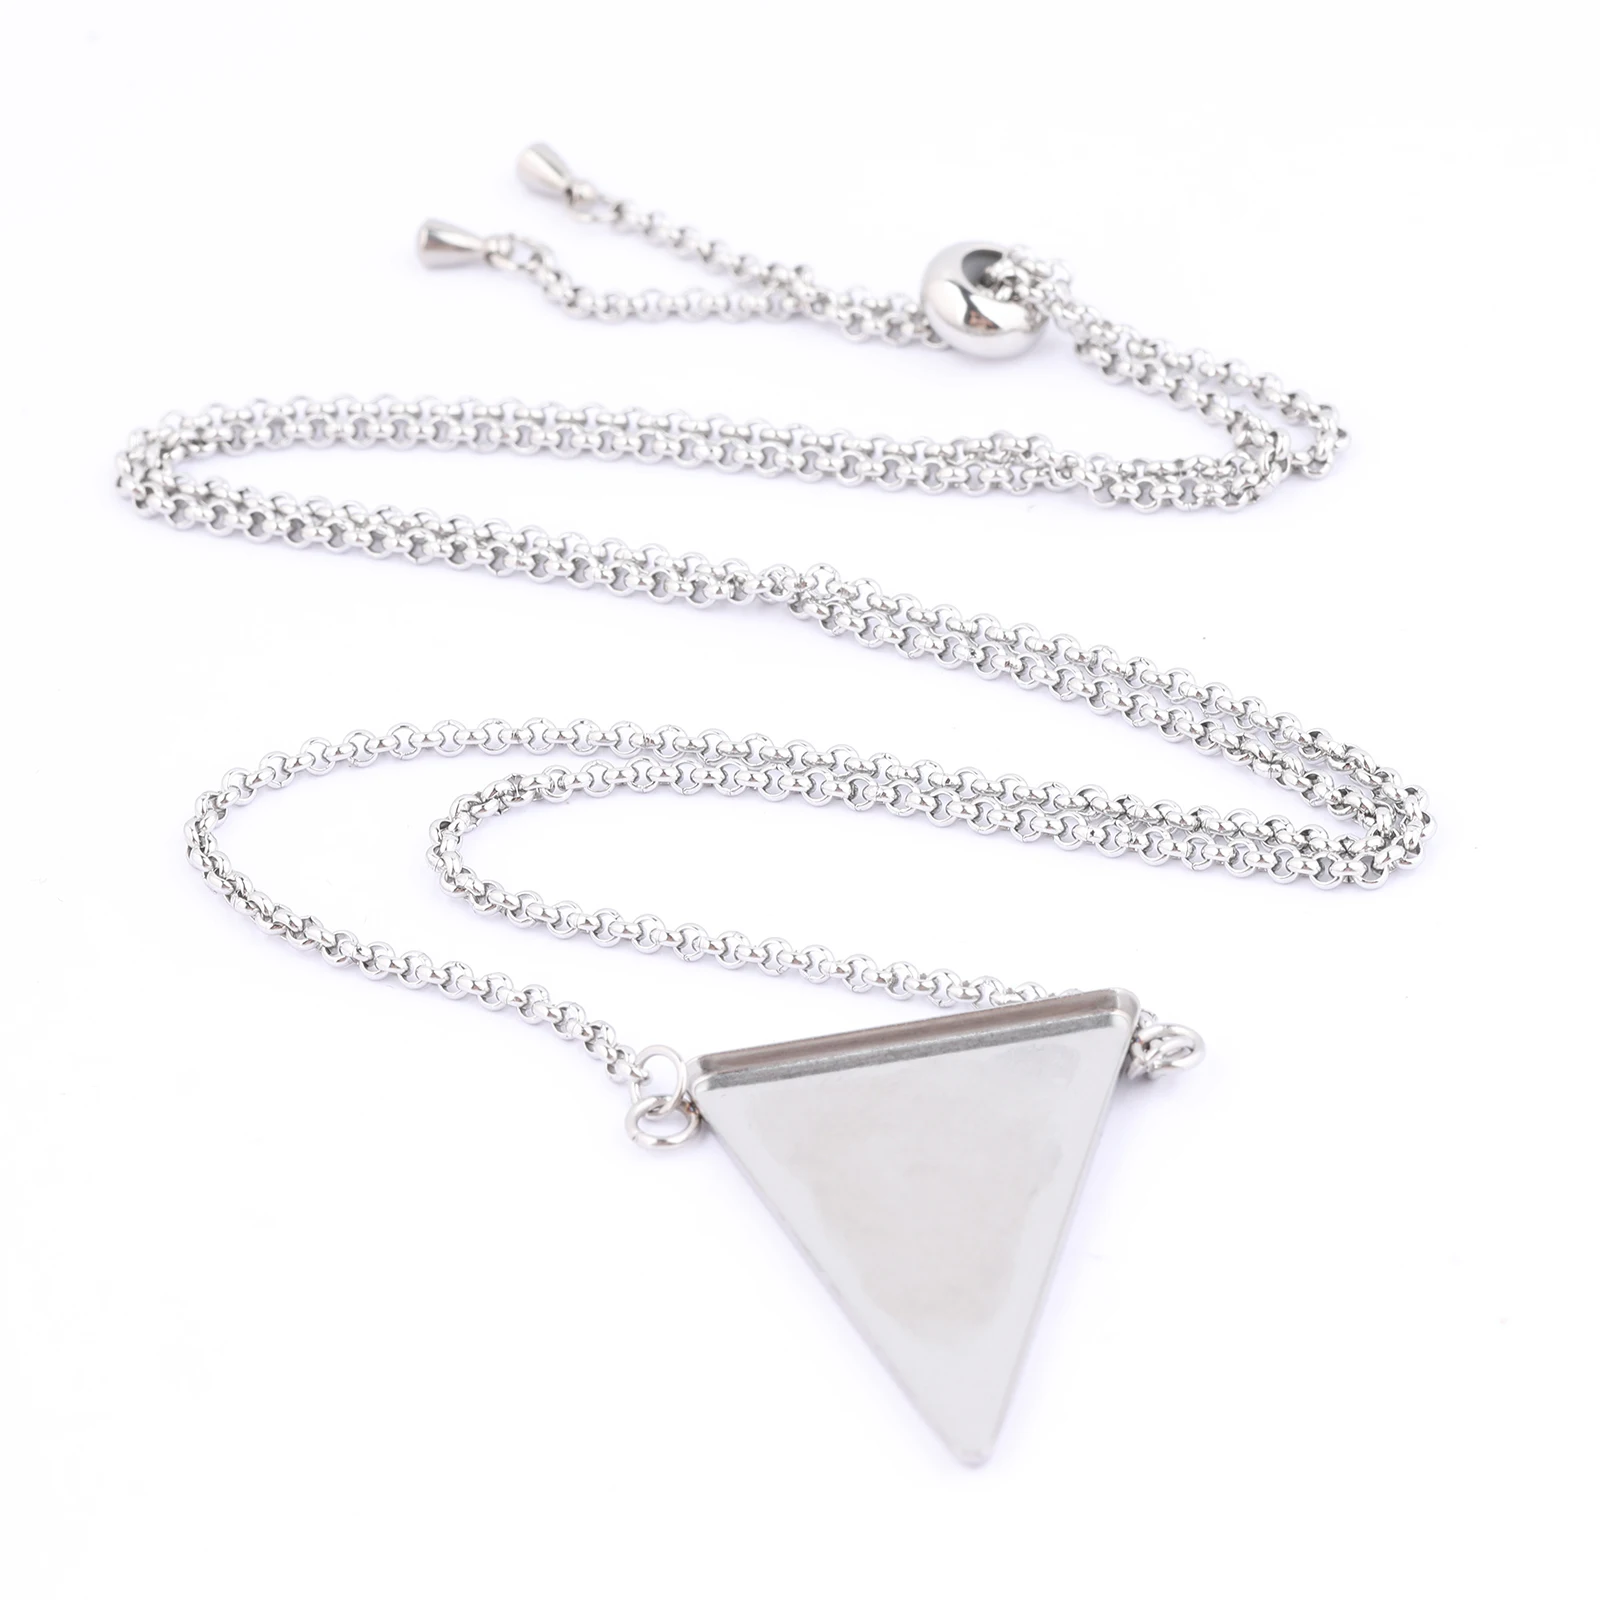 

2pcs Stainless Steel 23x33mm Triangle Cabochon Pendant Base Setting Trays Diy Adjustable Chain Necklace Bezel Blanks